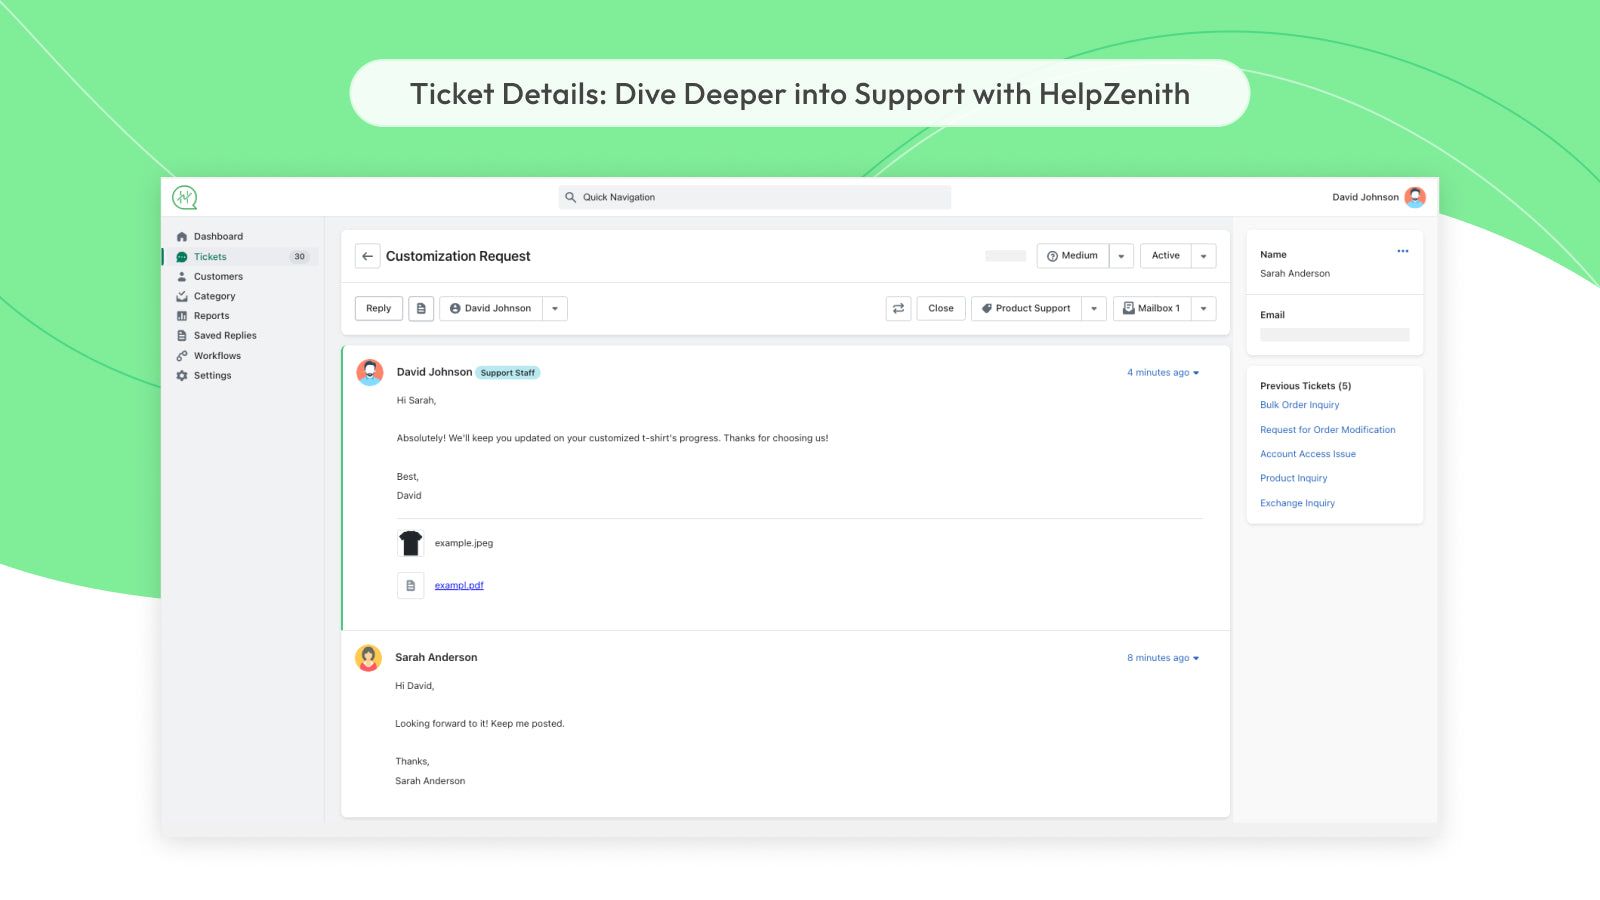 Ticket Details: Dive Deeper into Support with HelpZenith